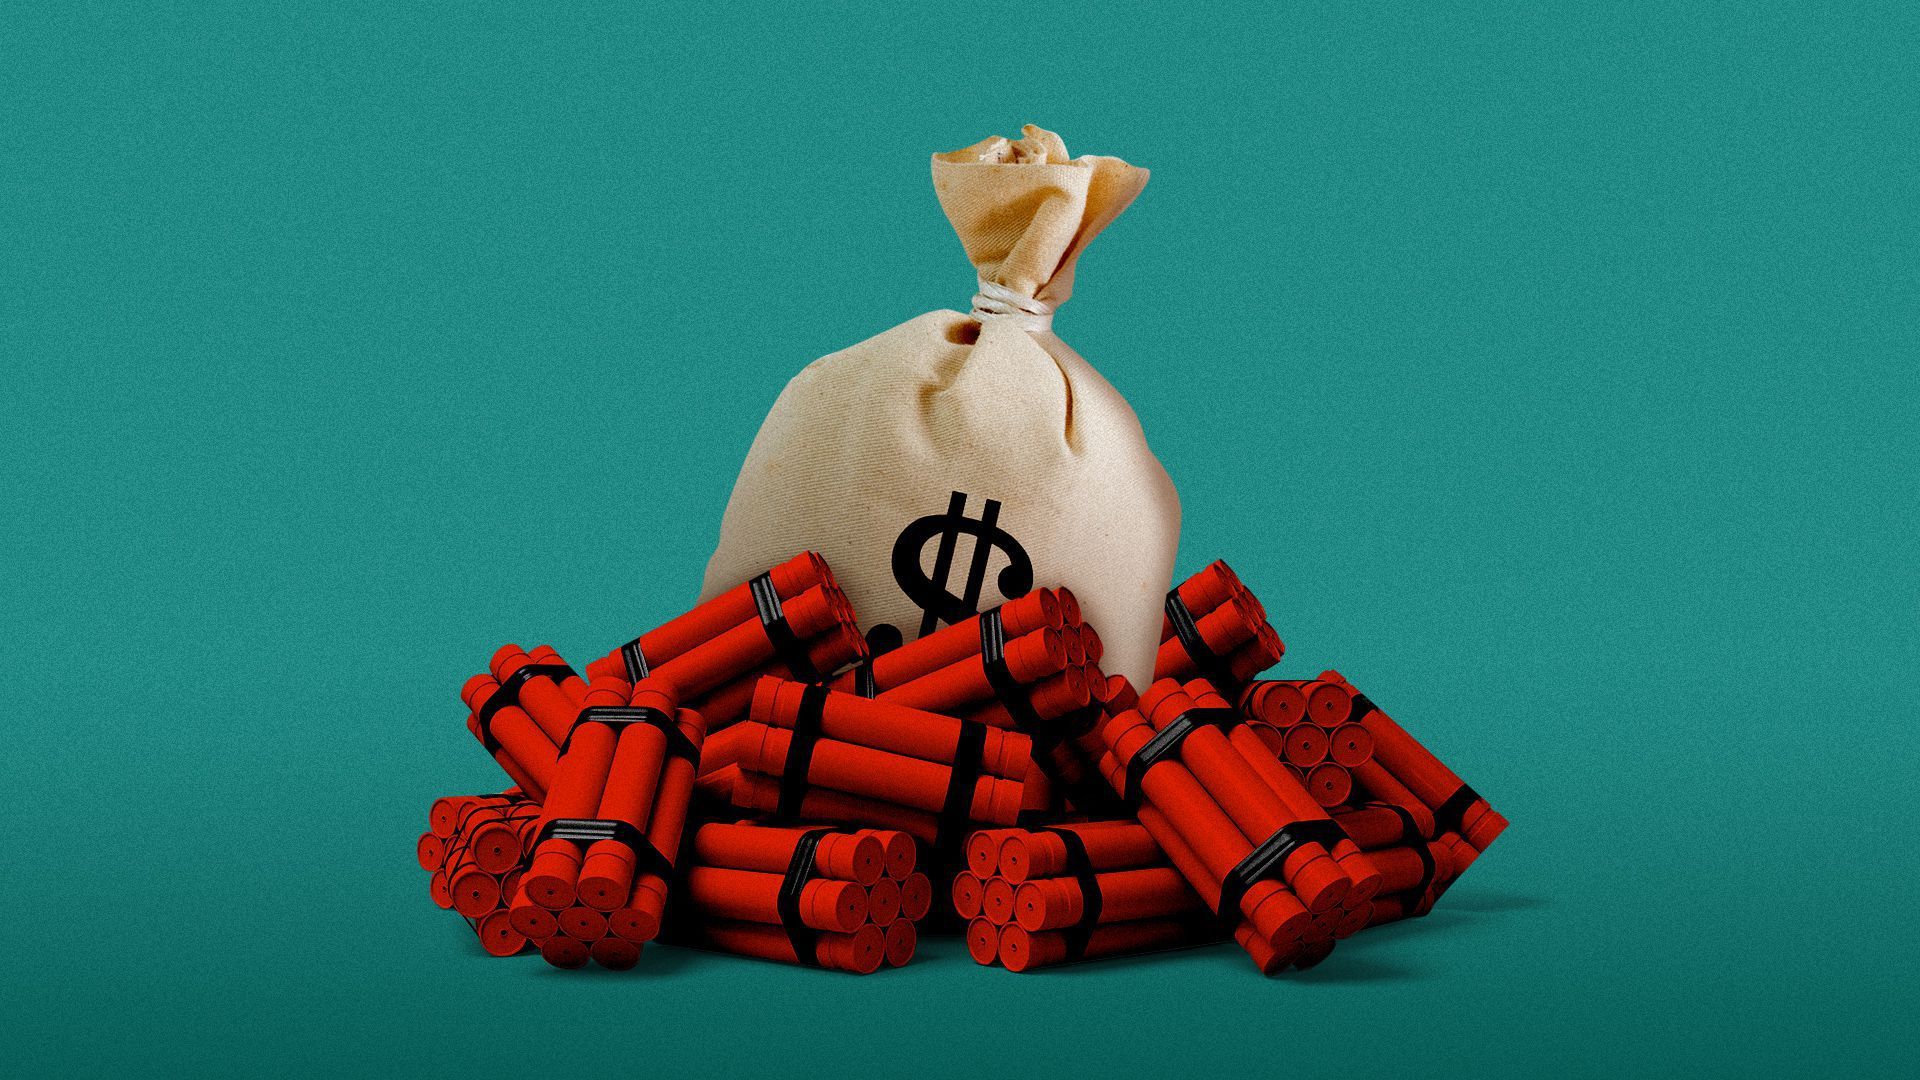 Illustration of a money bag surrounded by bundles of dynamite.